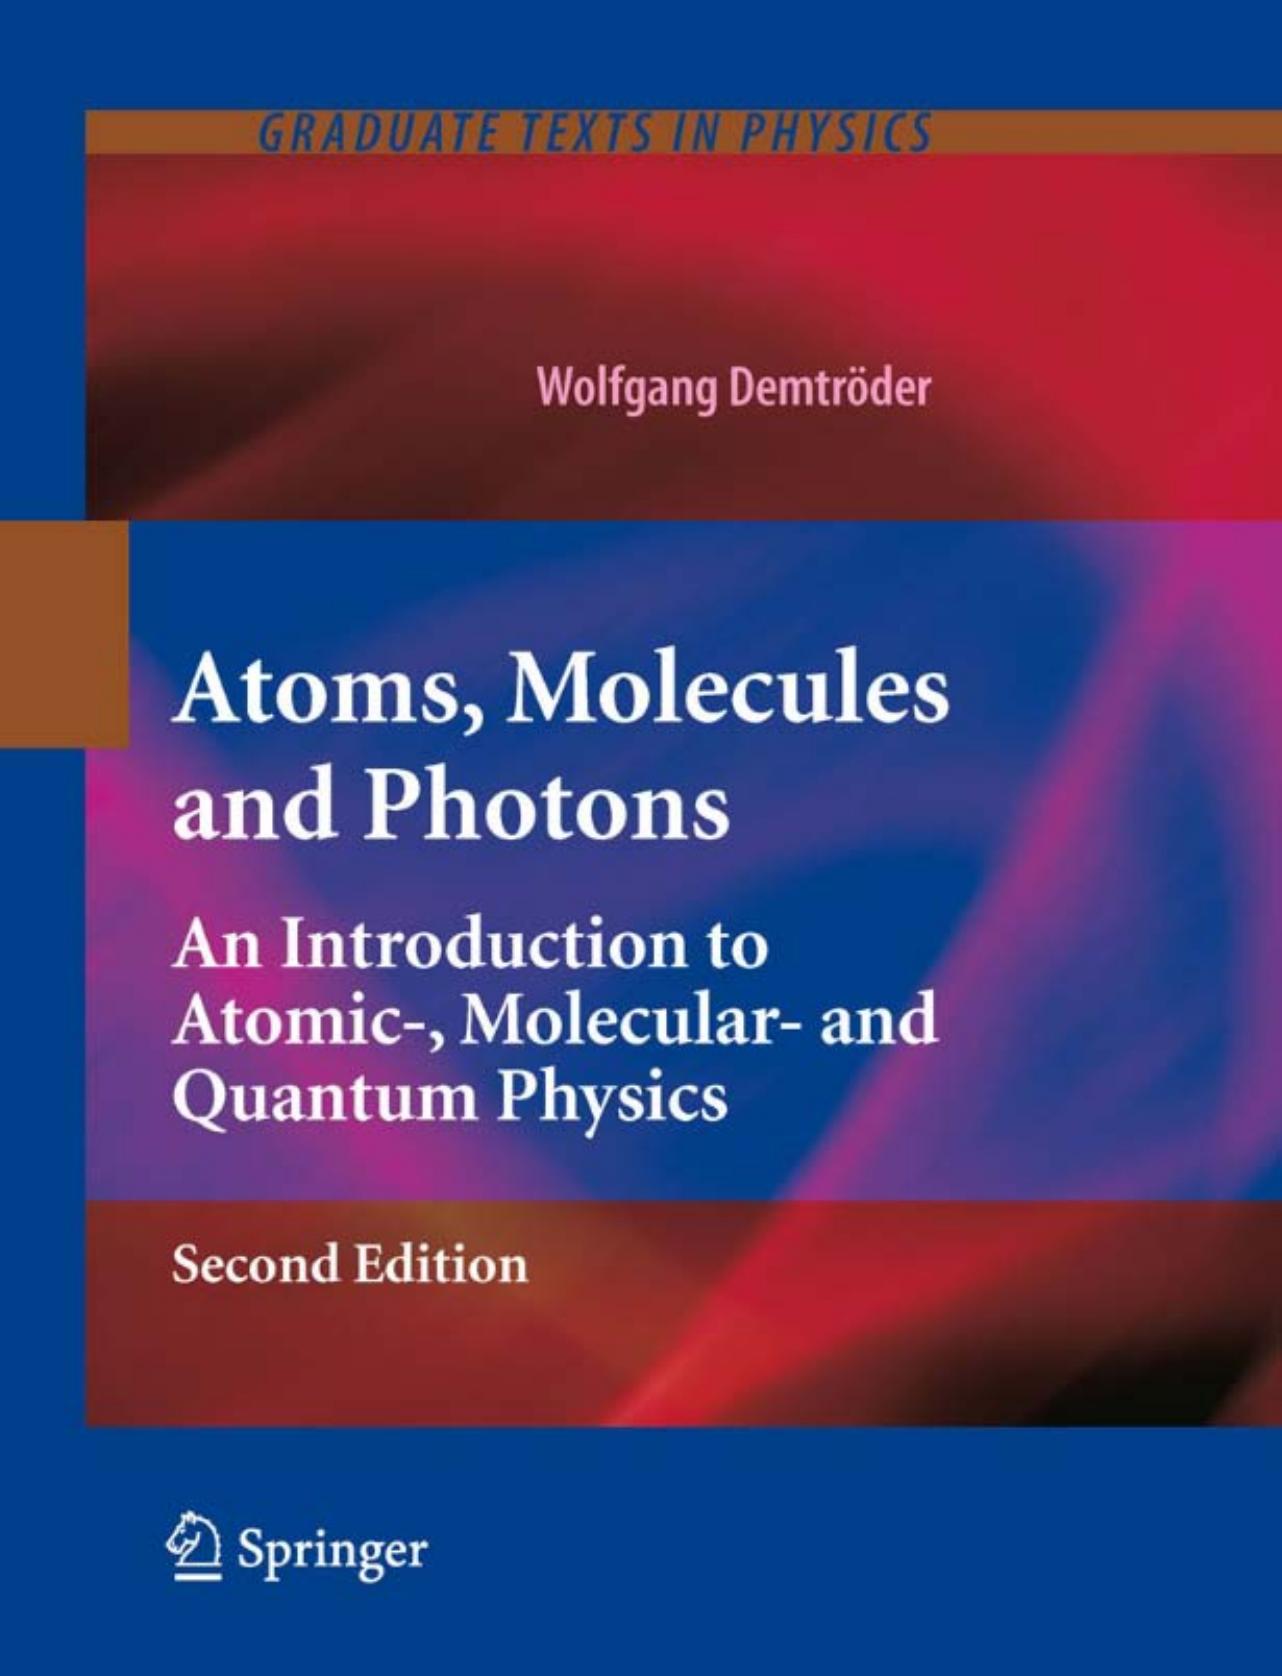 Atoms, Molecules and Photons: An Introduction to Atomic-, Molecular- and Quantum Physics, Second Edition (Graduate Texts in Physics)